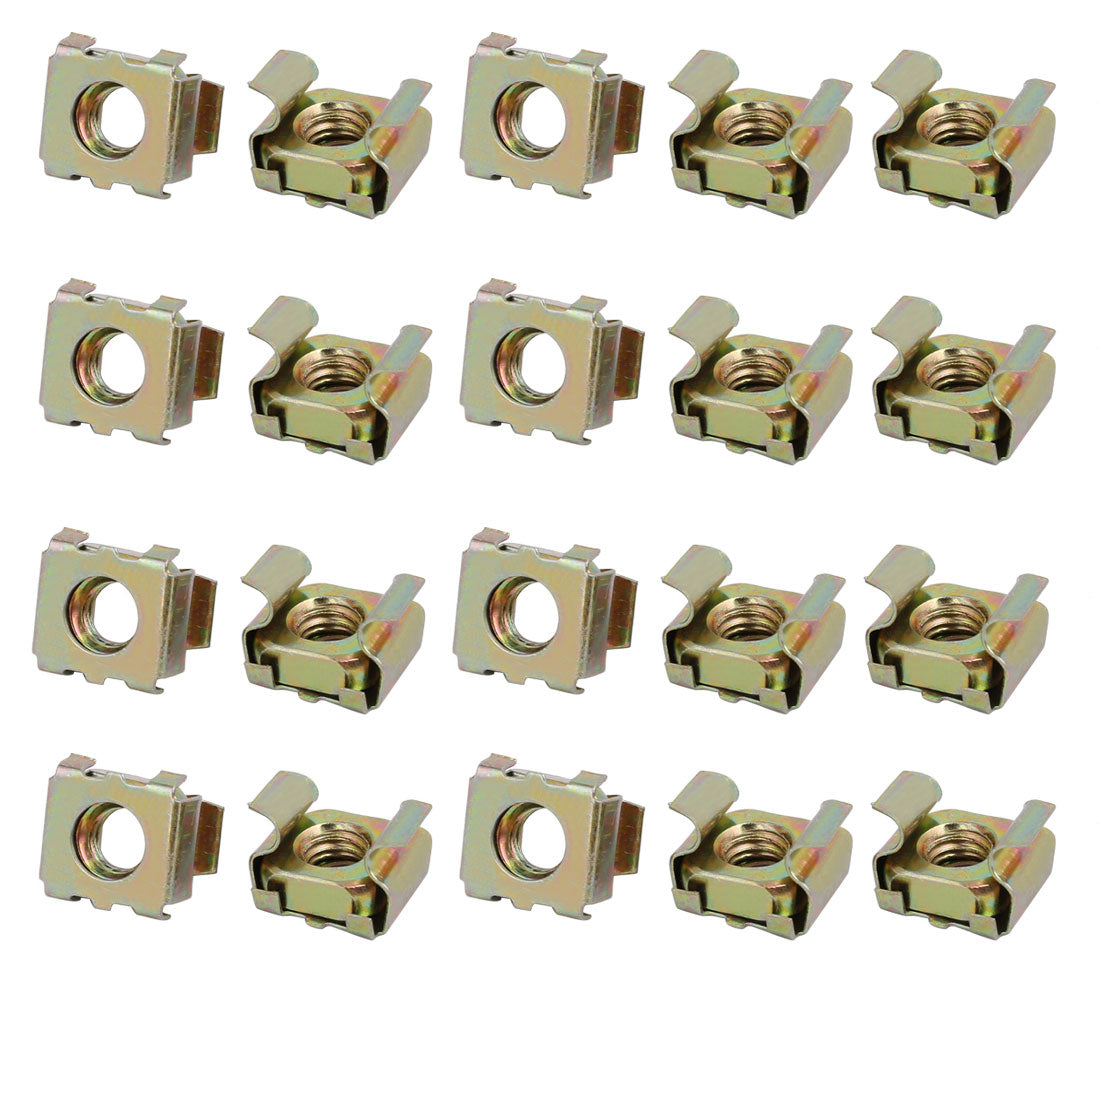 uxcell Uxcell 20pcs M6 Carbon Steel Captive Cage Nut Brass Tone for Server Shelf Cabinet